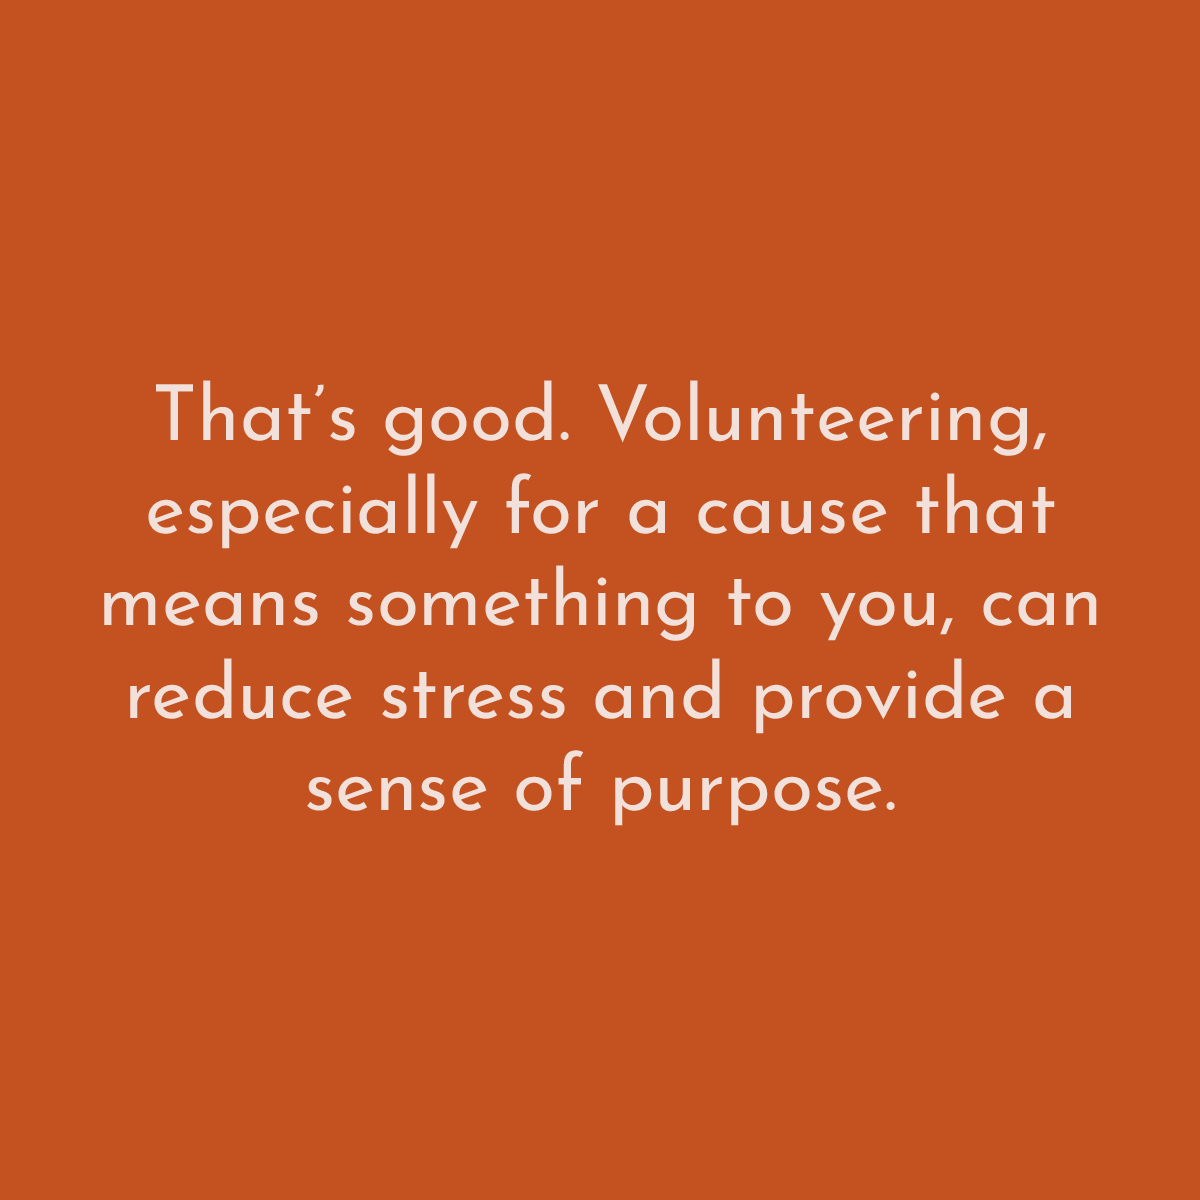 That's good. Volunteering, especially for a cause that means something to you can reduce stress and provide a sense of purpose.